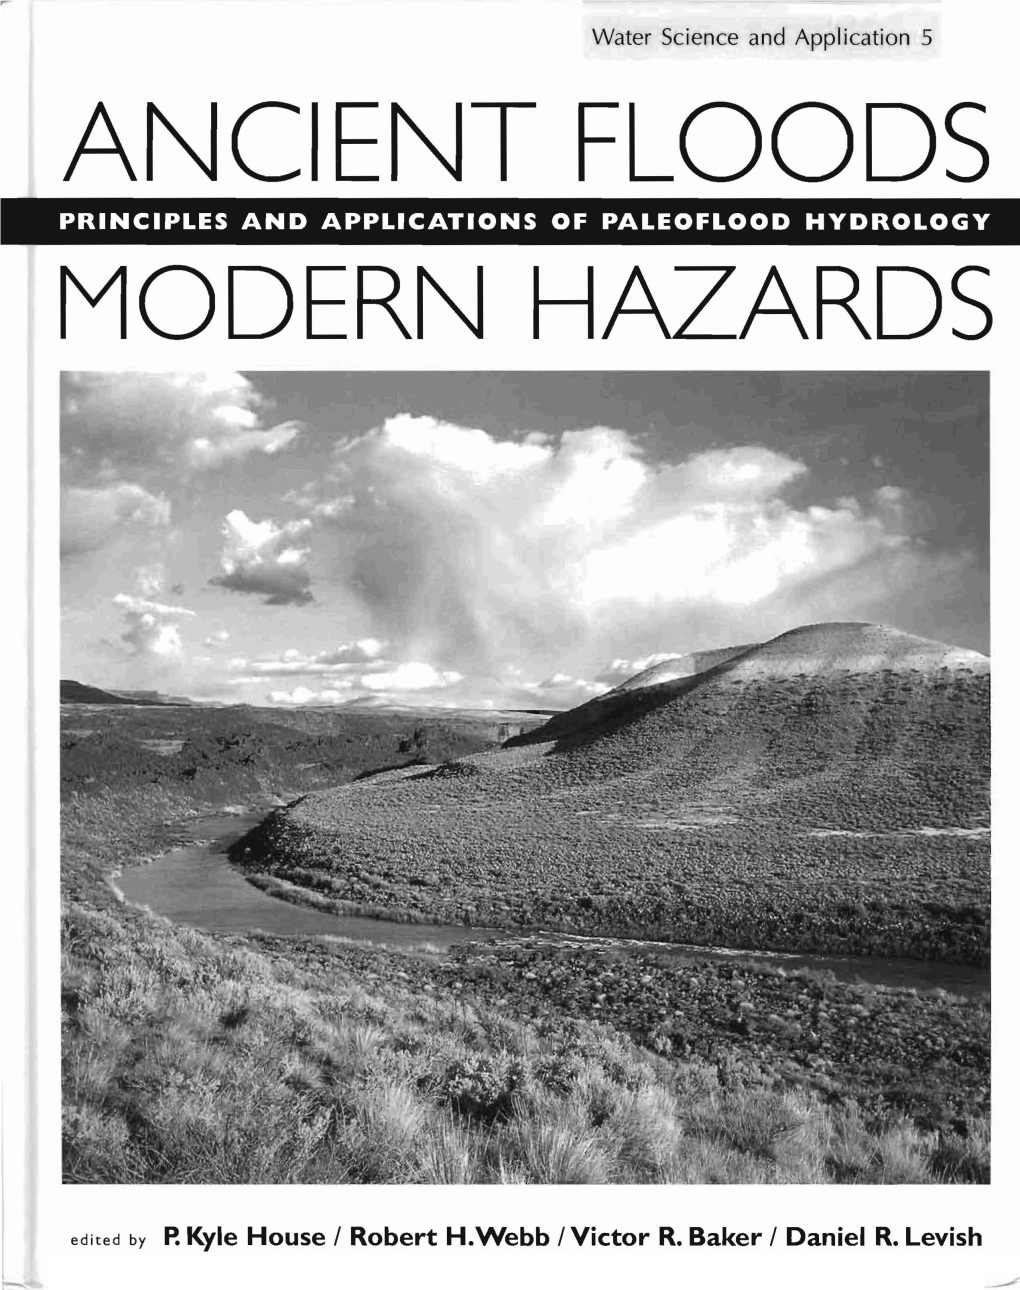 Ancient Floods Principles and Applications of Paleoflood Hydrology Modern Hazards